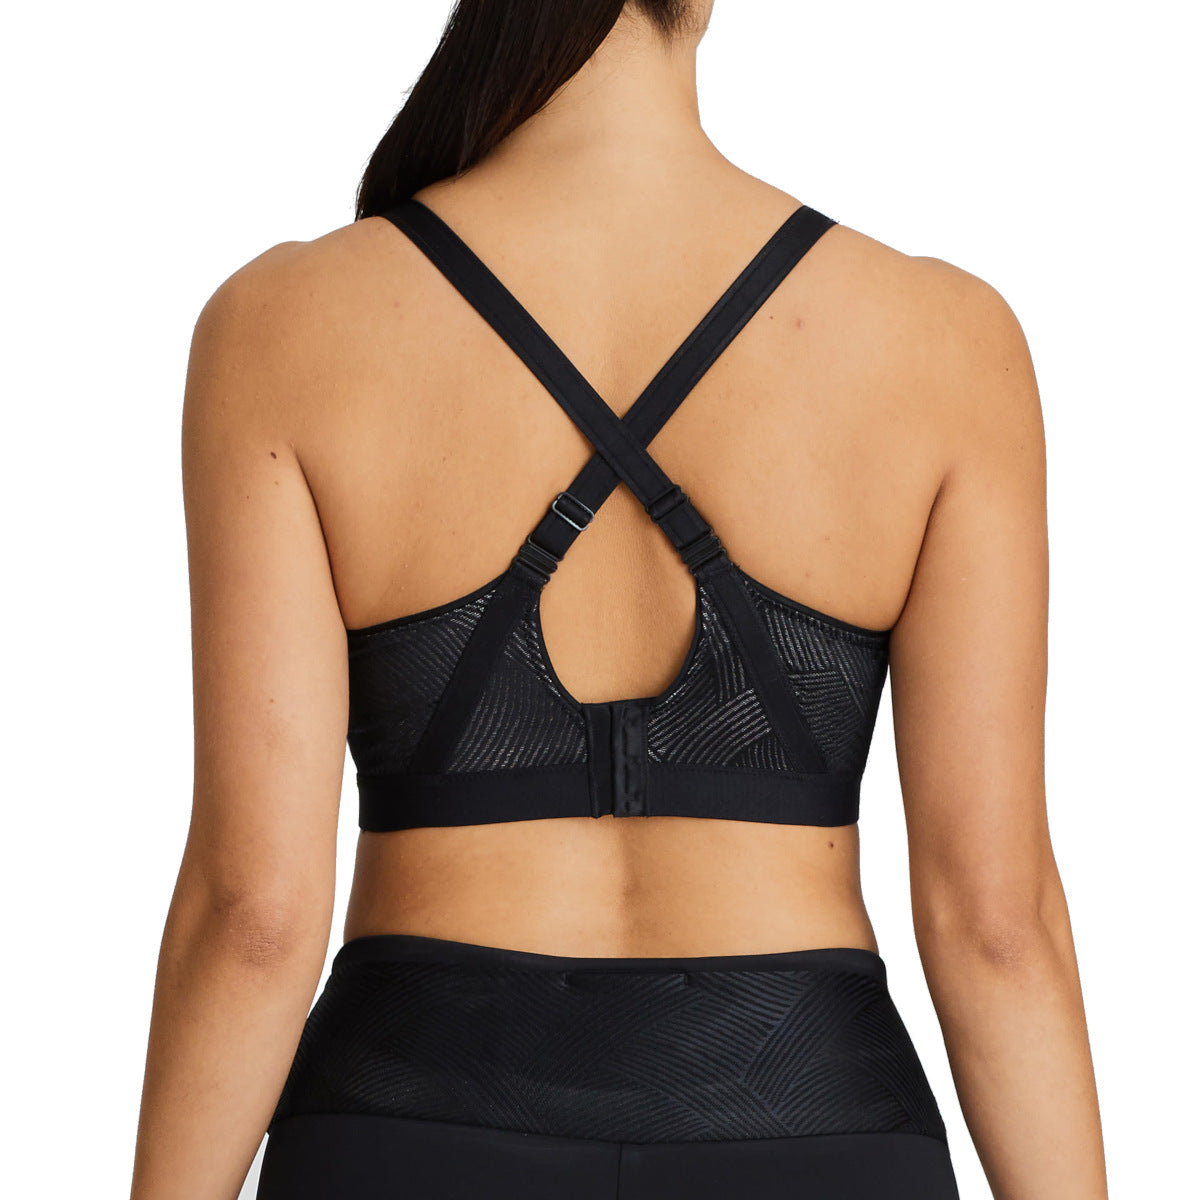 Prima Donna The Game Padded Wired Sports Bra